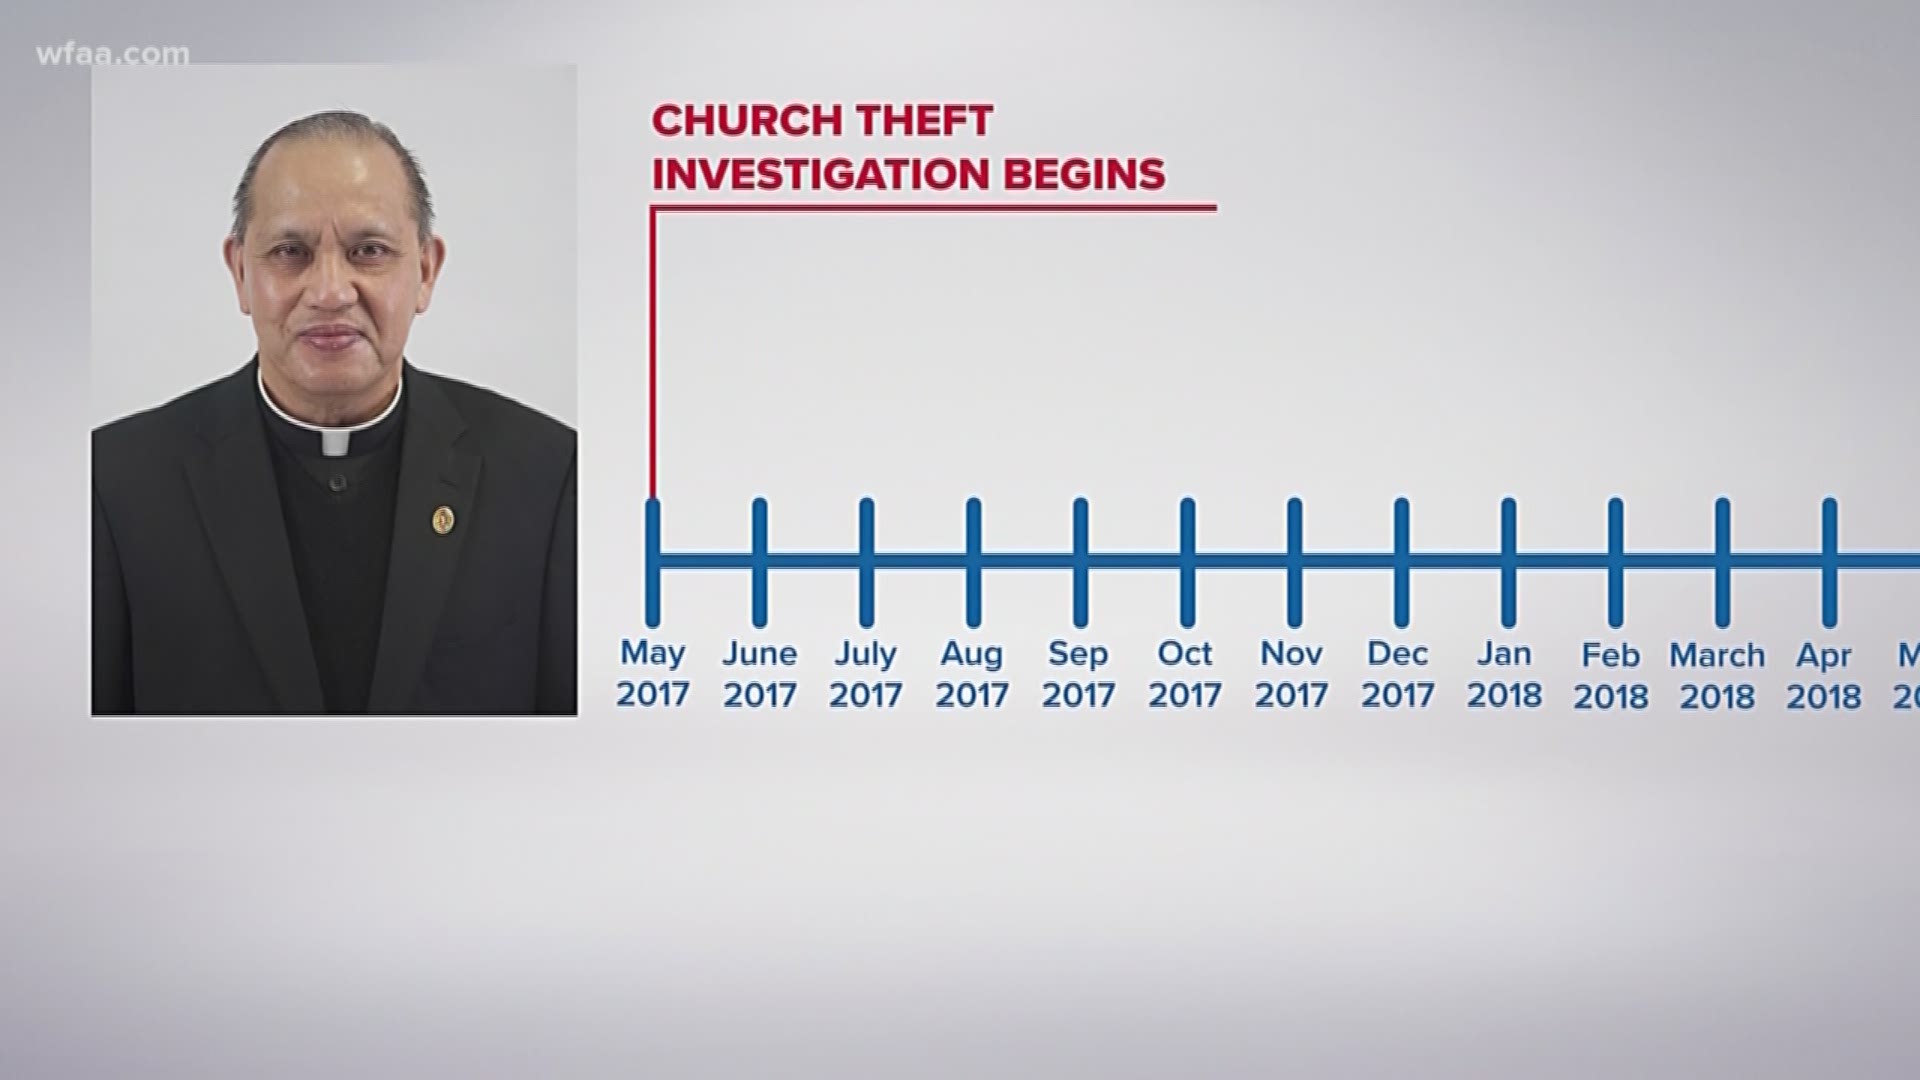 Arrest warrant issued for Dallas priest